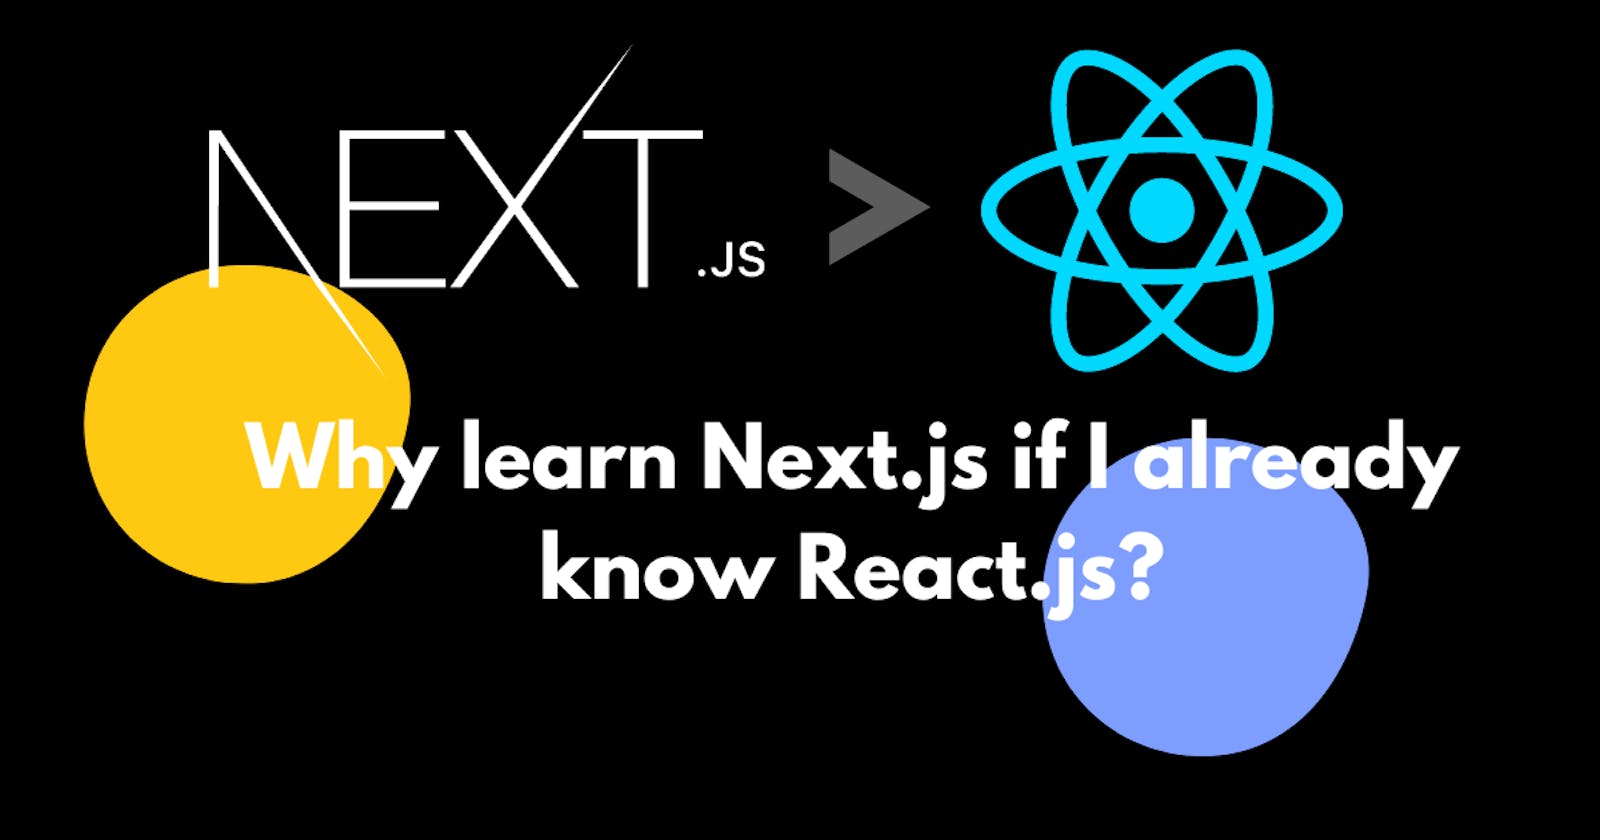 Why learn Next.js if I already know React.js?